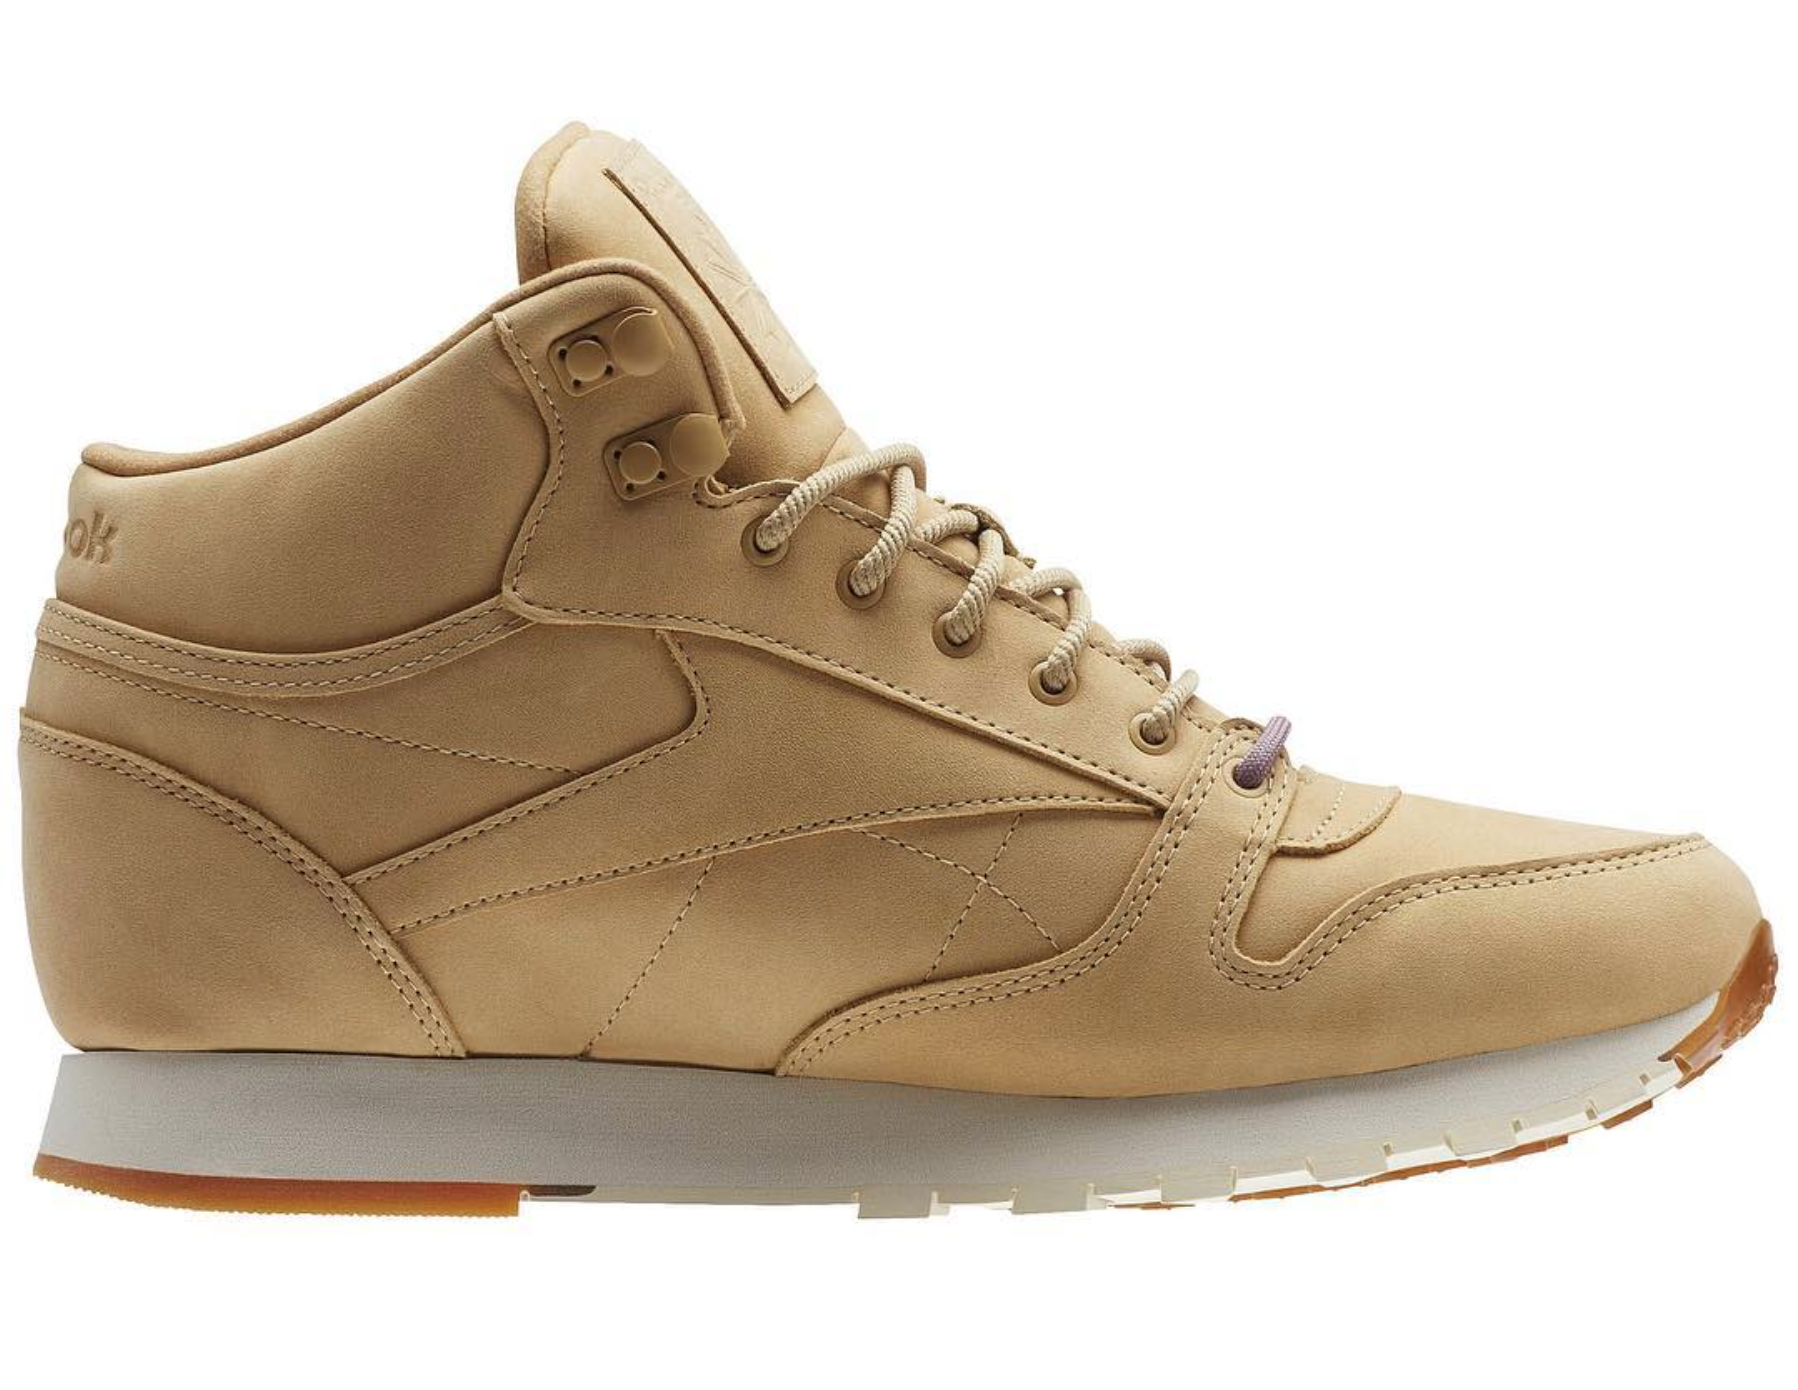 The Reebok Classic Leather Mid is 